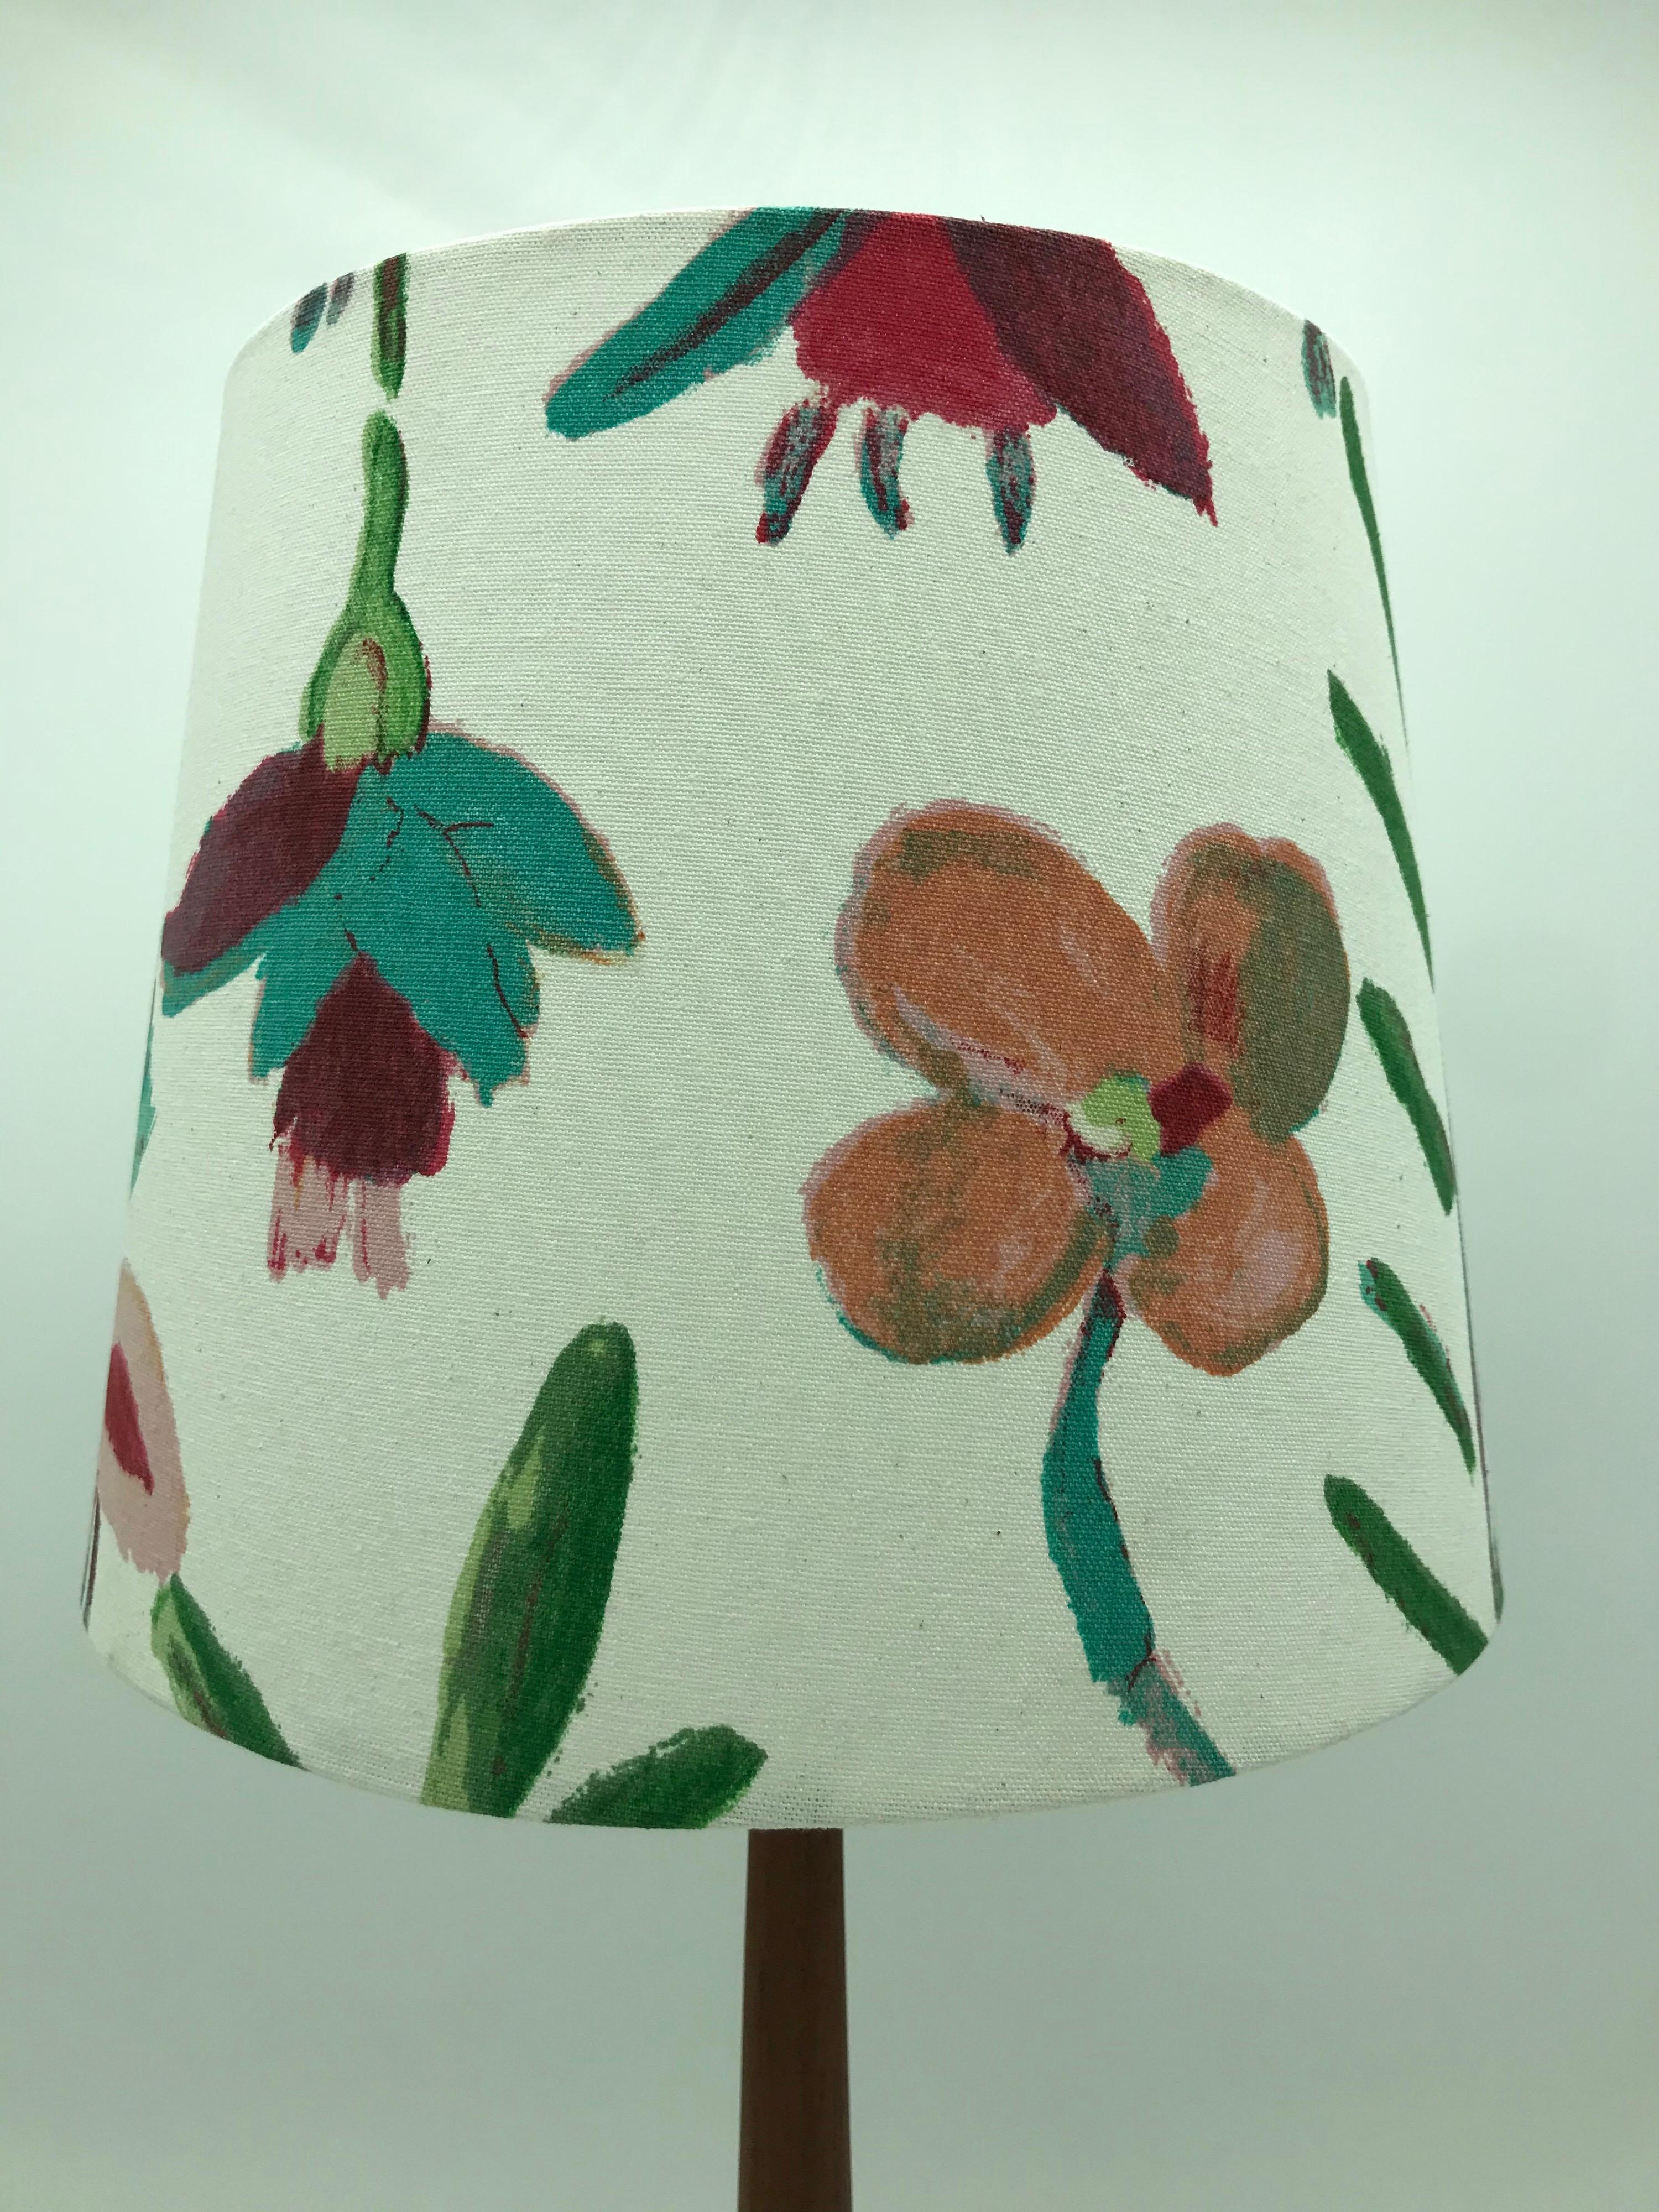 Vintage Holm Sørensen table lamp from the 1950s in teak and brass.
Topped off with a beautiful limited edition lampshade from ArbyMaj in the manner of Josef Frank.
Rewired and can be delivered with an EU or US plug.